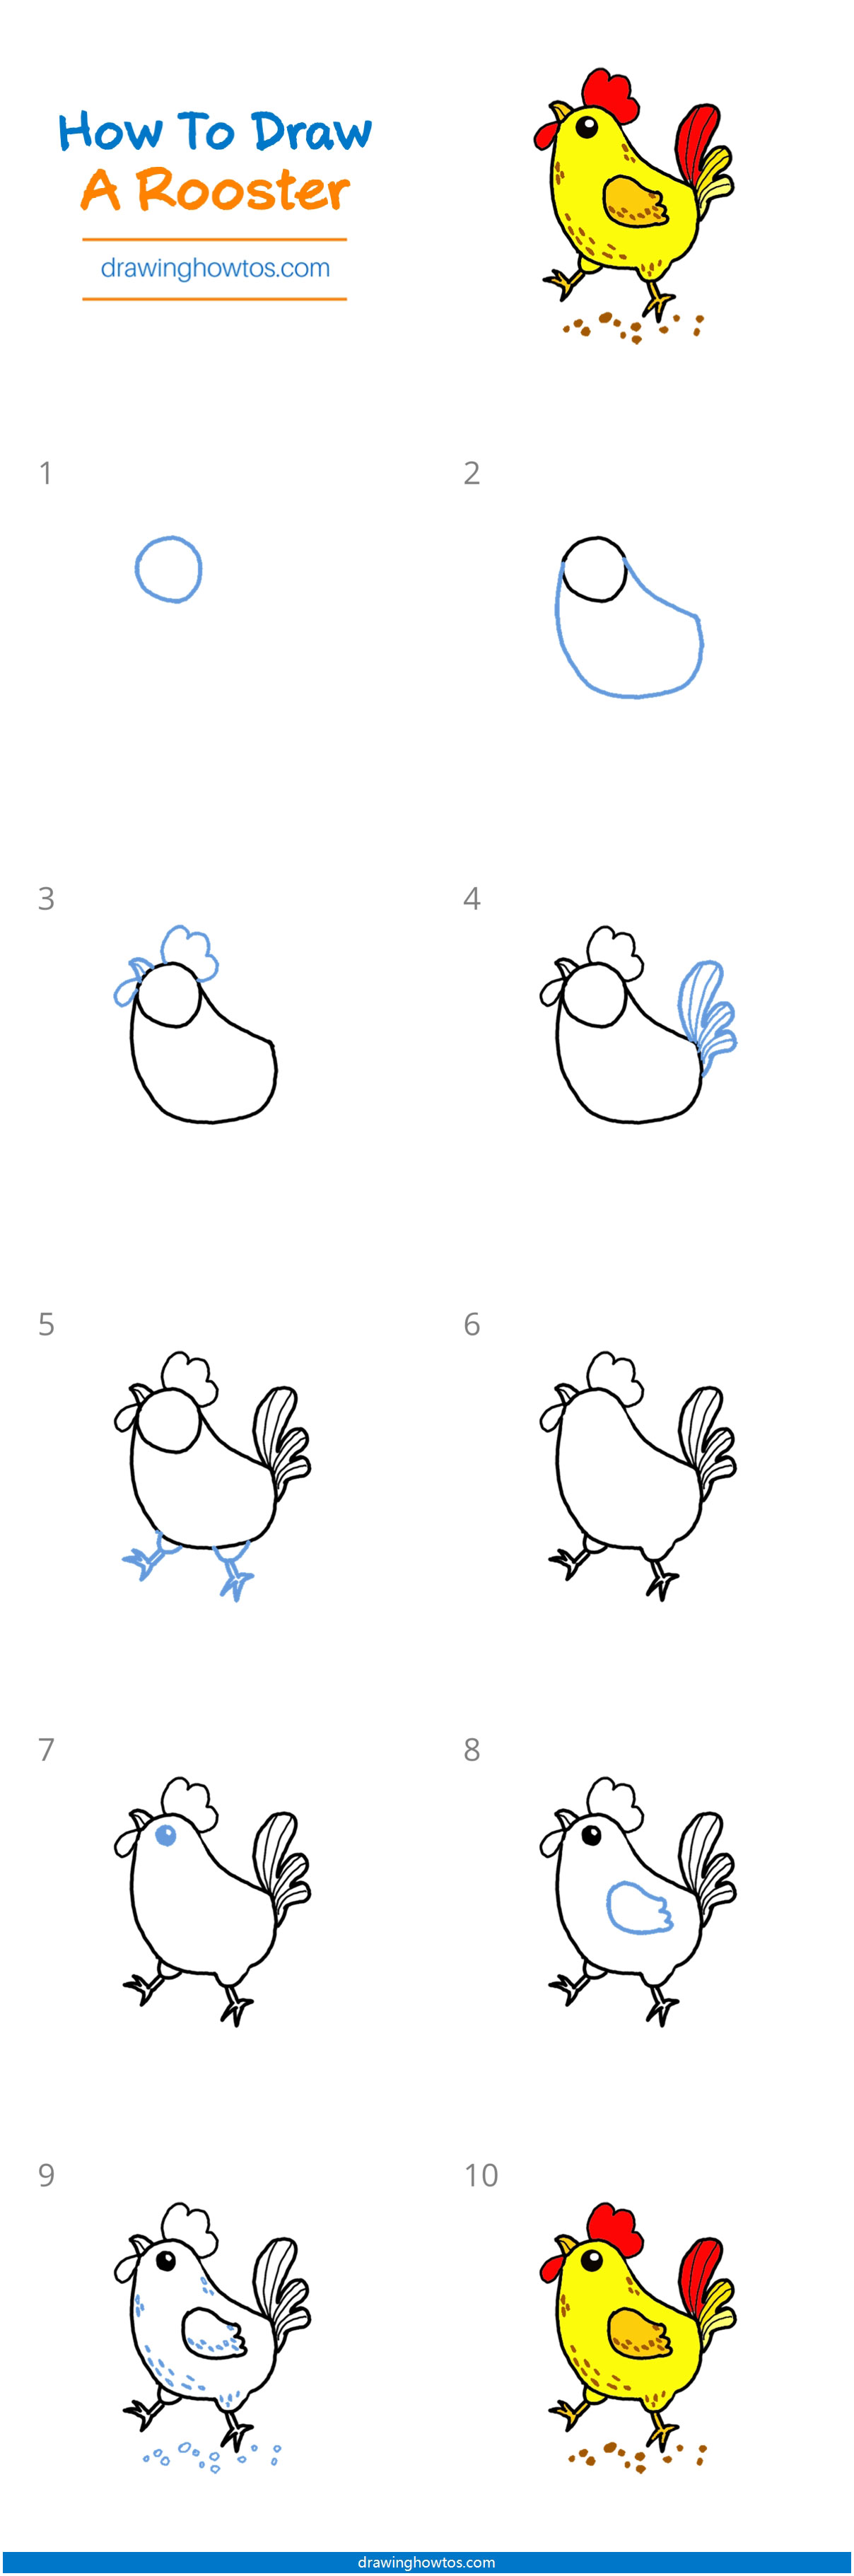 How to Draw a Rooster Step by Step